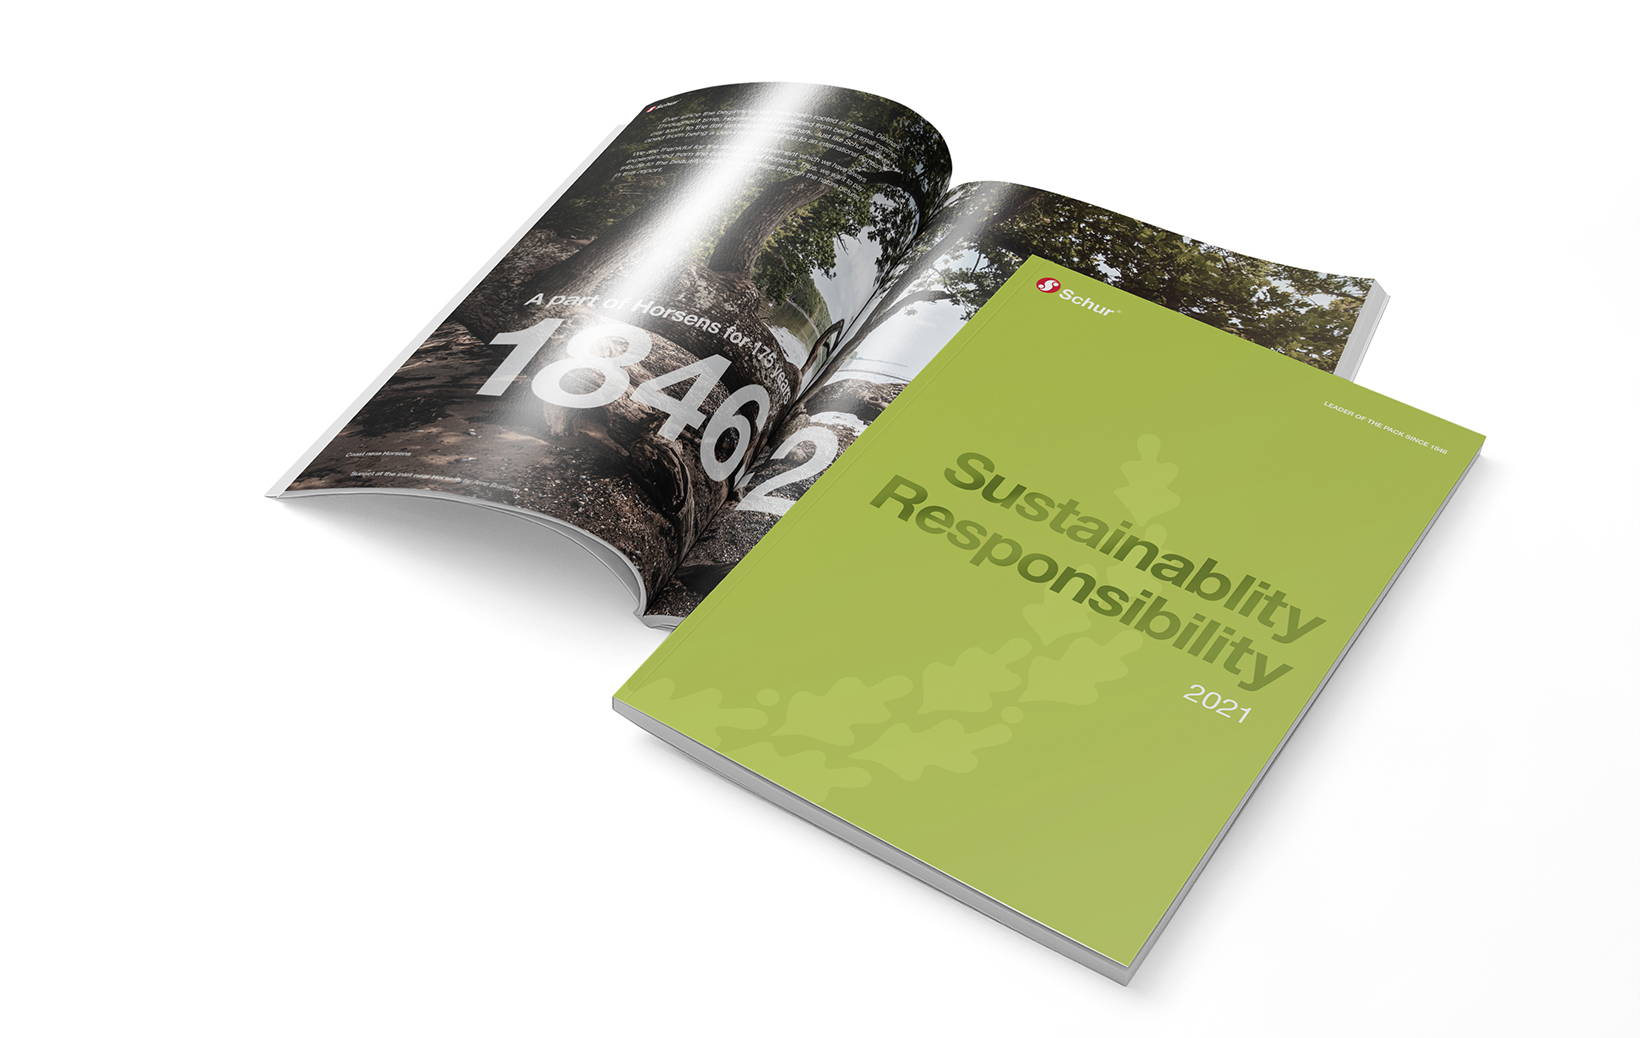 Read our sustainability report - 2020/21